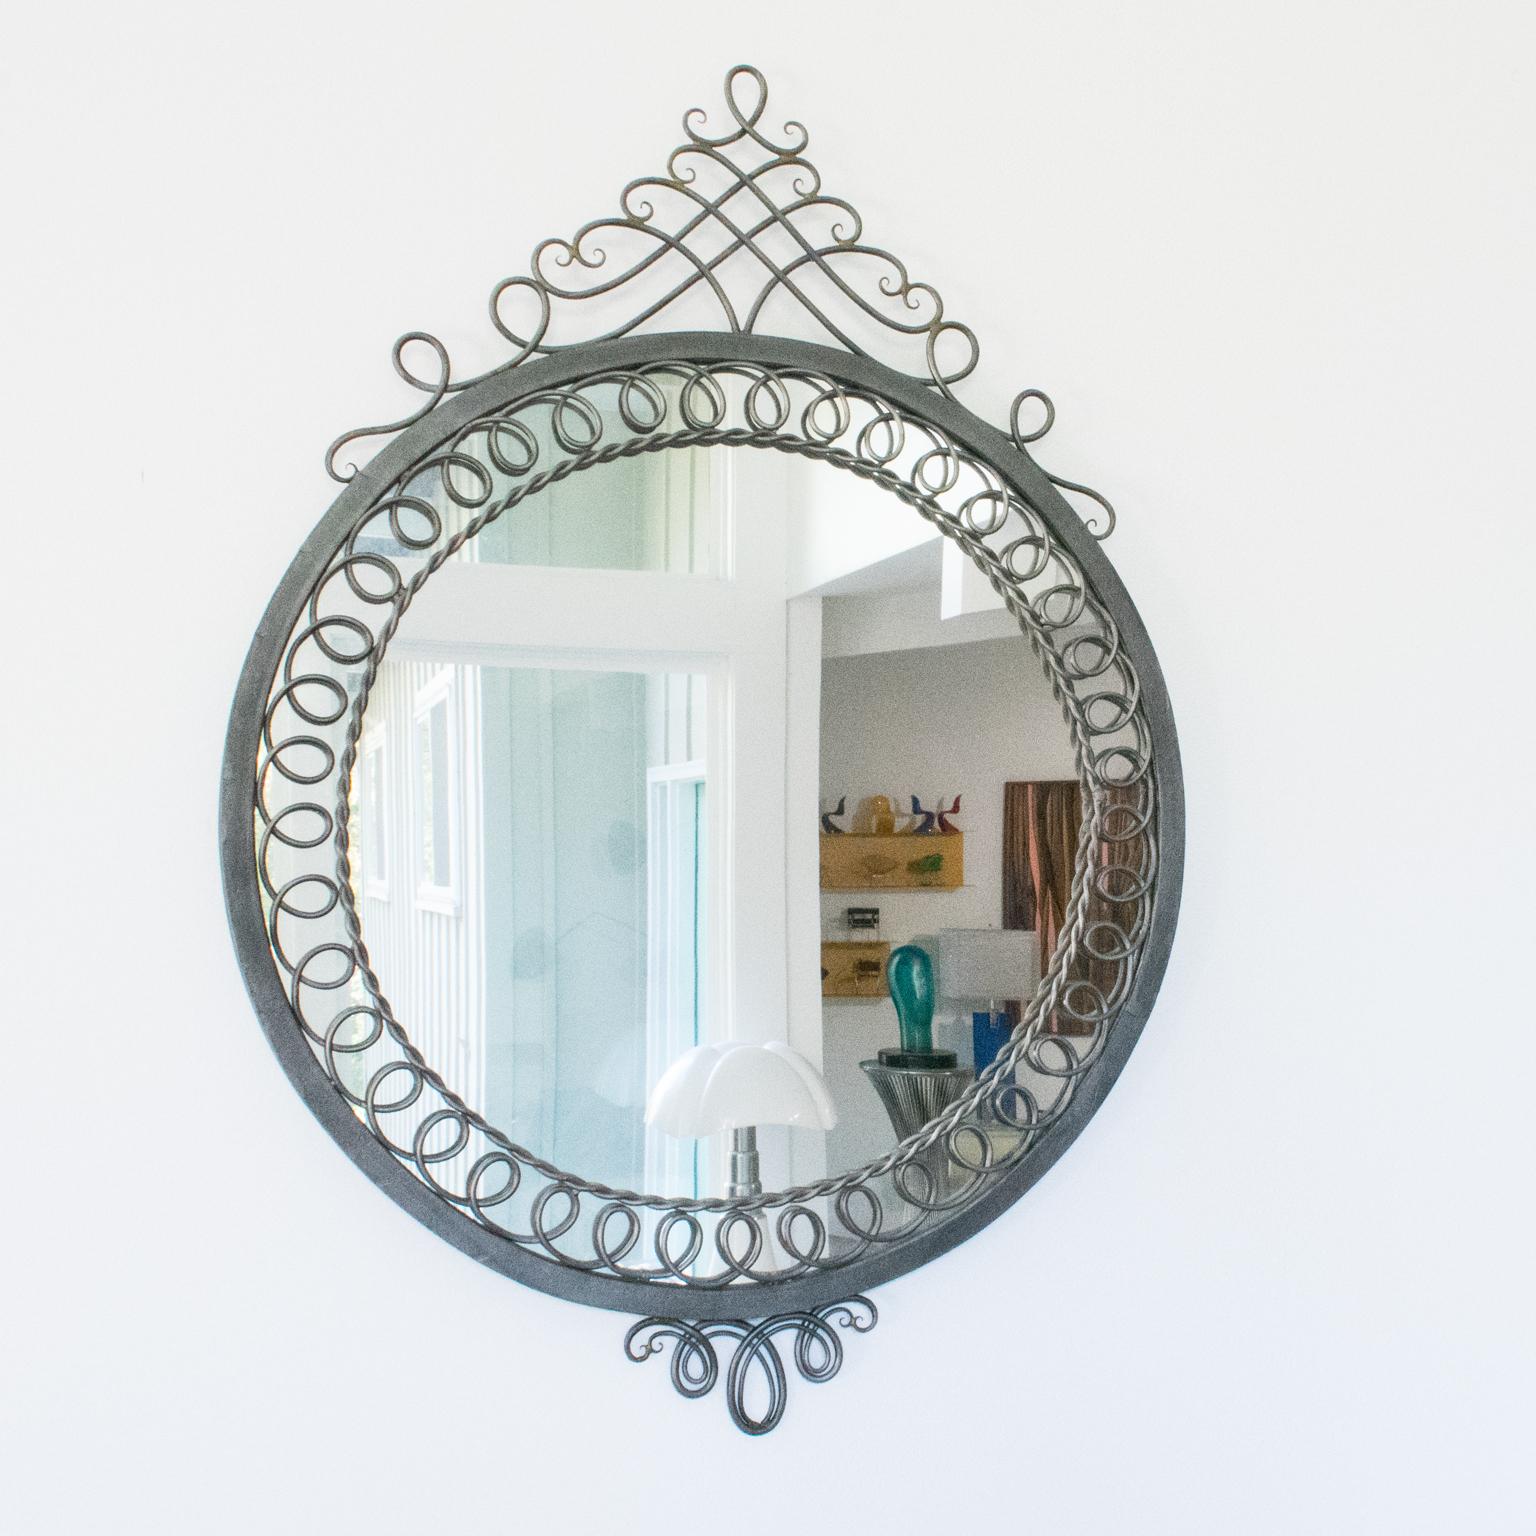 Modern Mid-Century Cast Iron Ornate Wall-Mounted Mirror, France 1950s For Sale